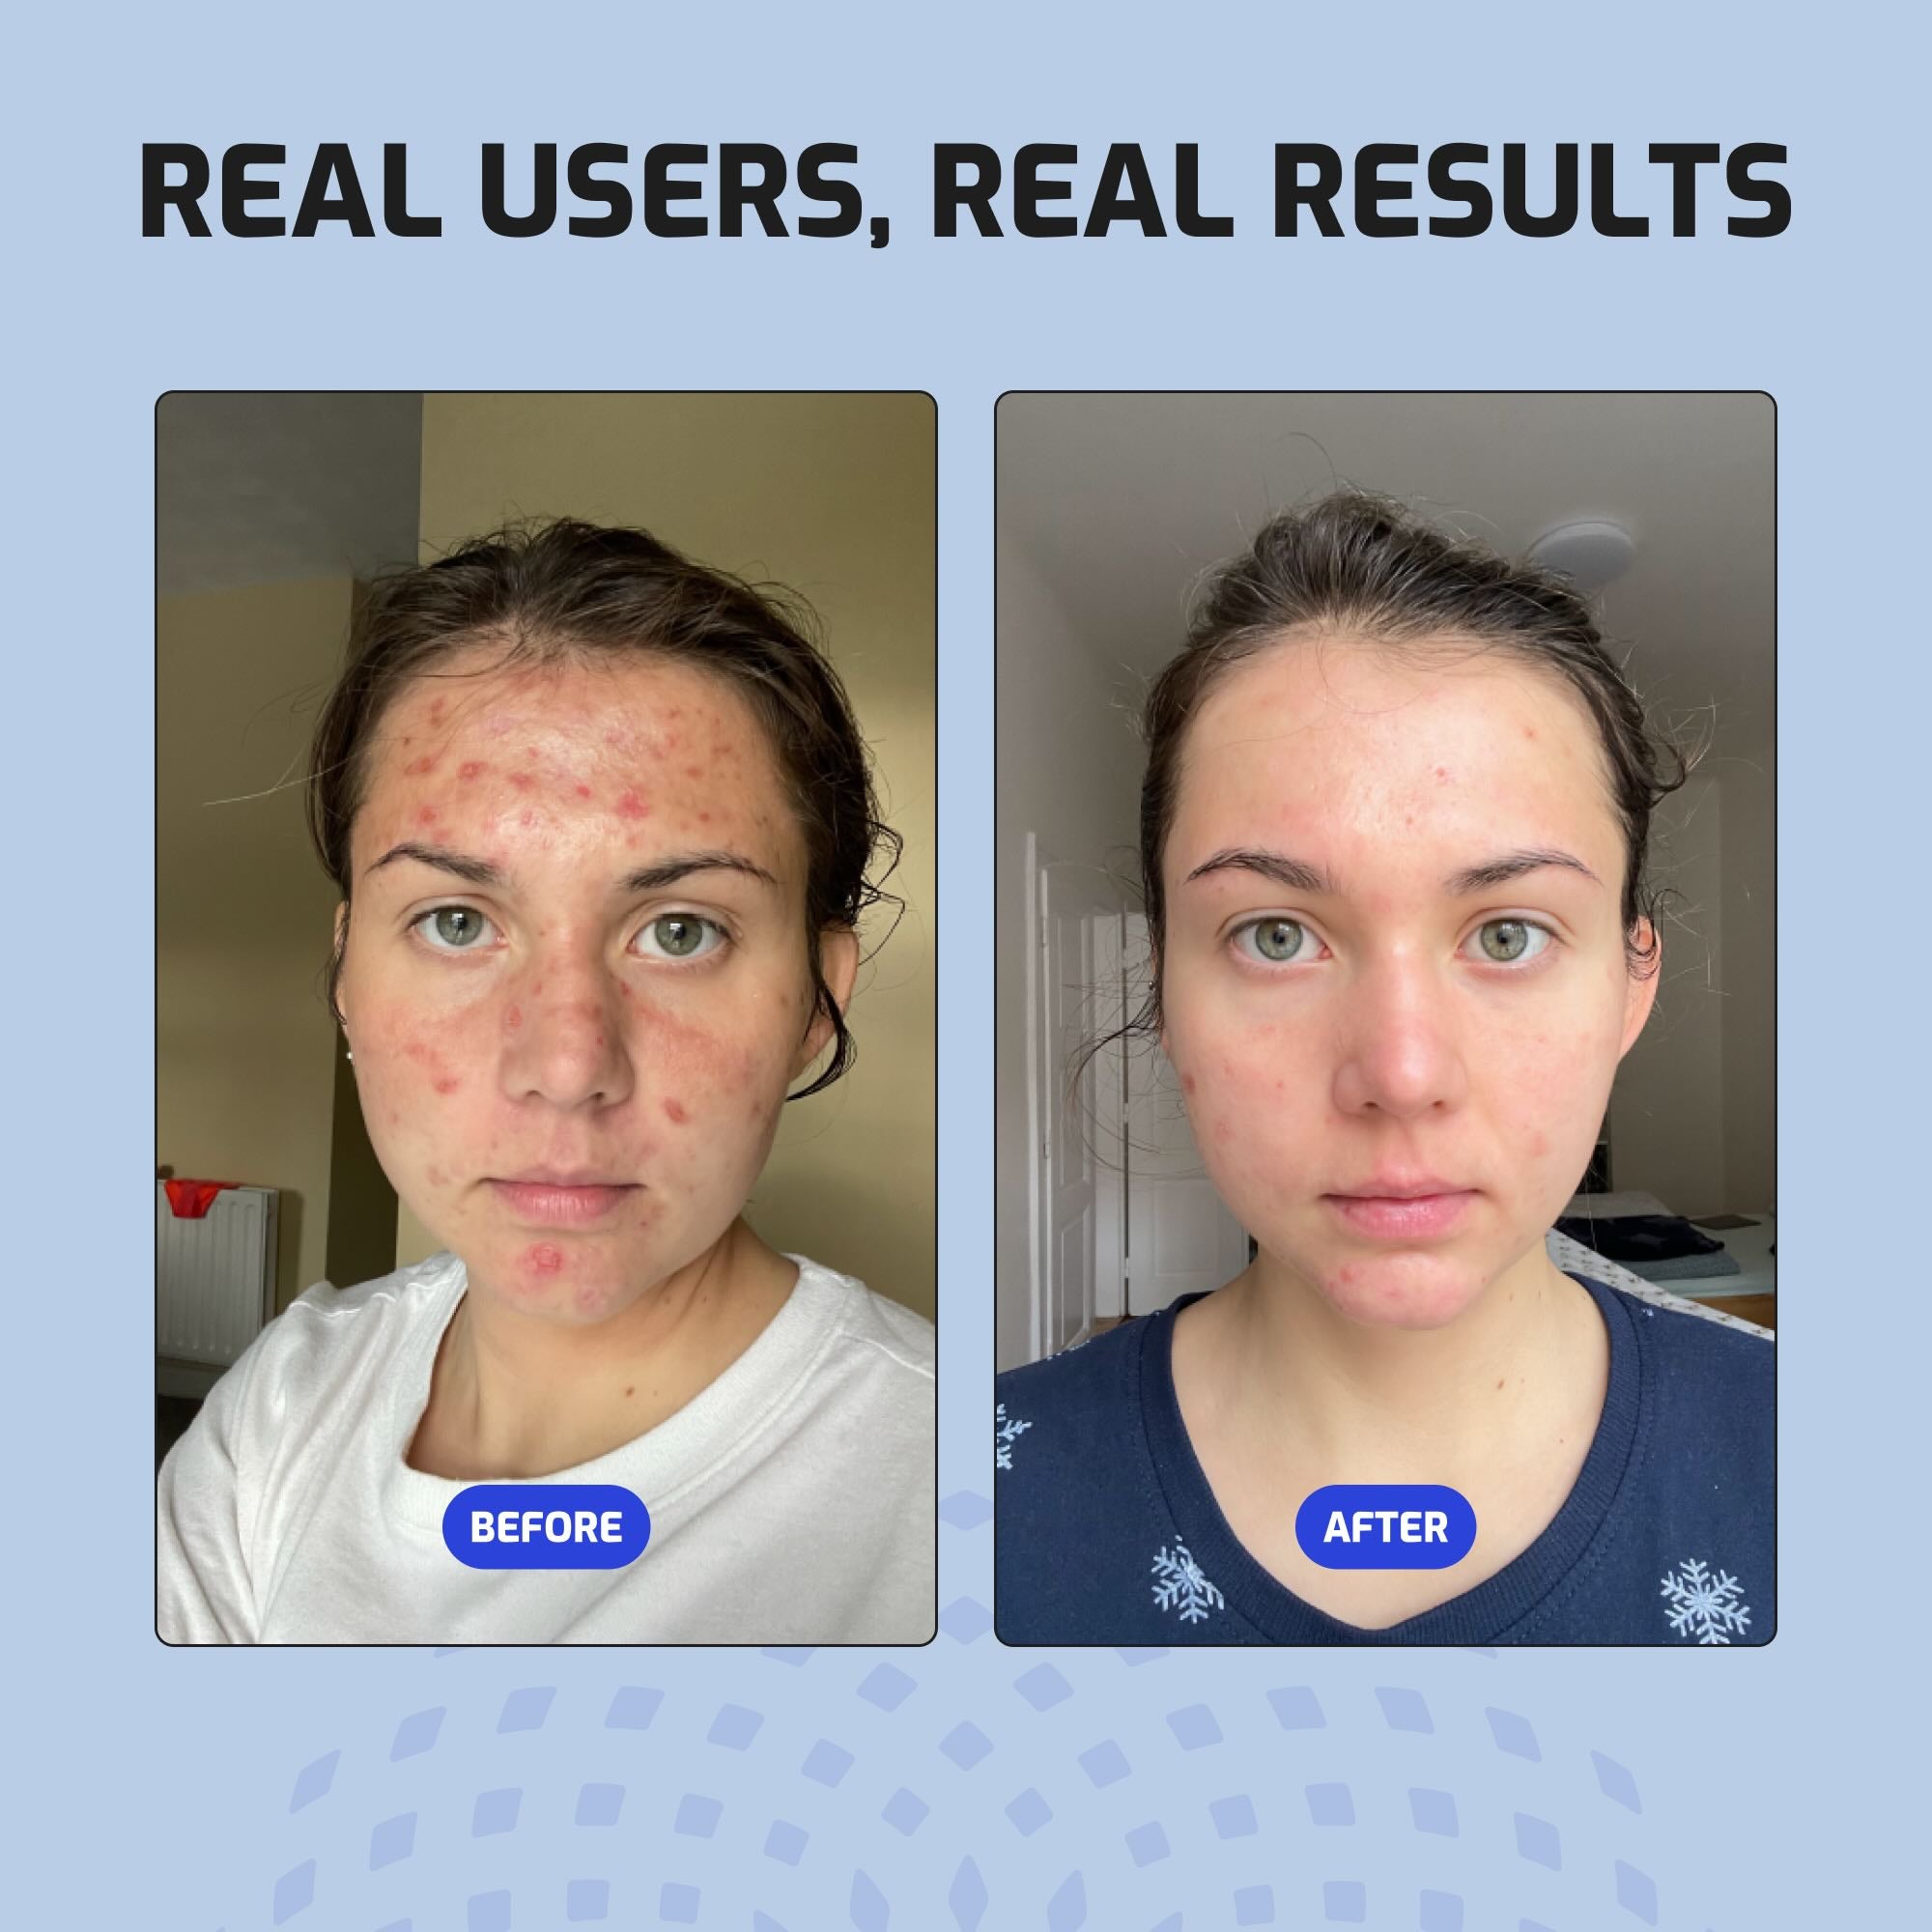 Before after image of a woman with acne.